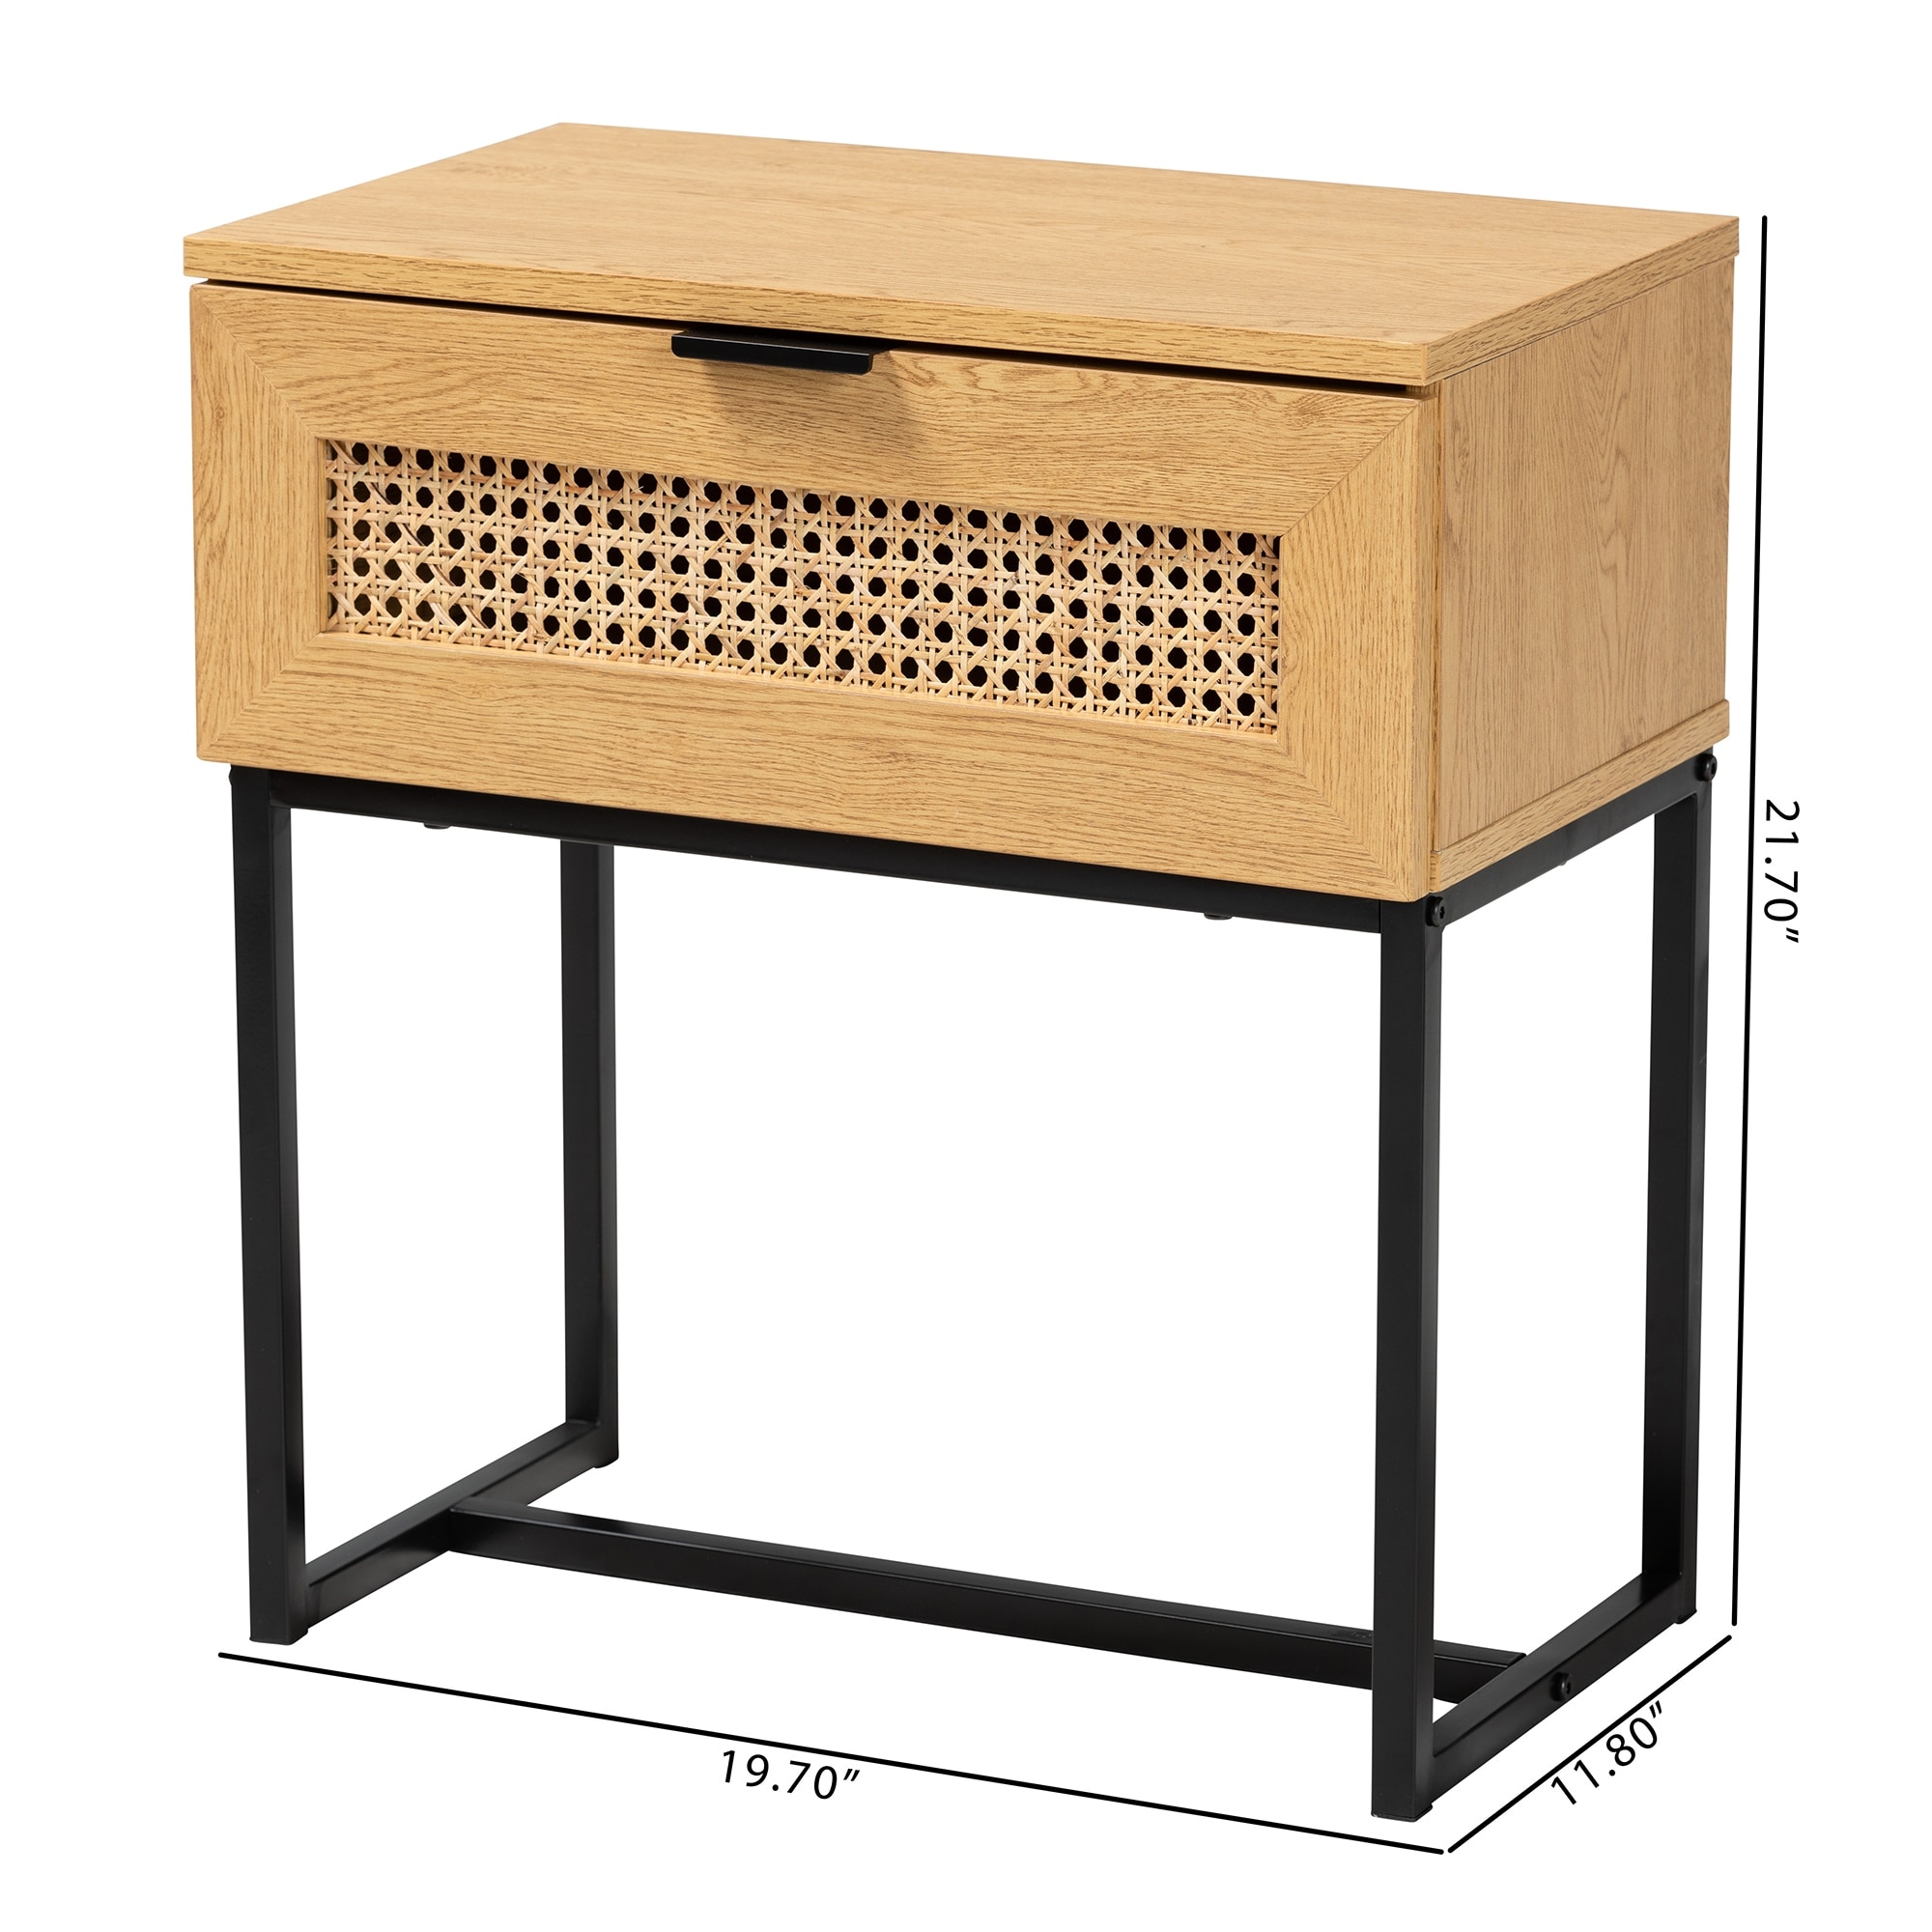 Sawyer Mid-Century Modern Industrial Oak Brown Finished Wood and Black Metal 1-Drawer End Table with Natural Rattan